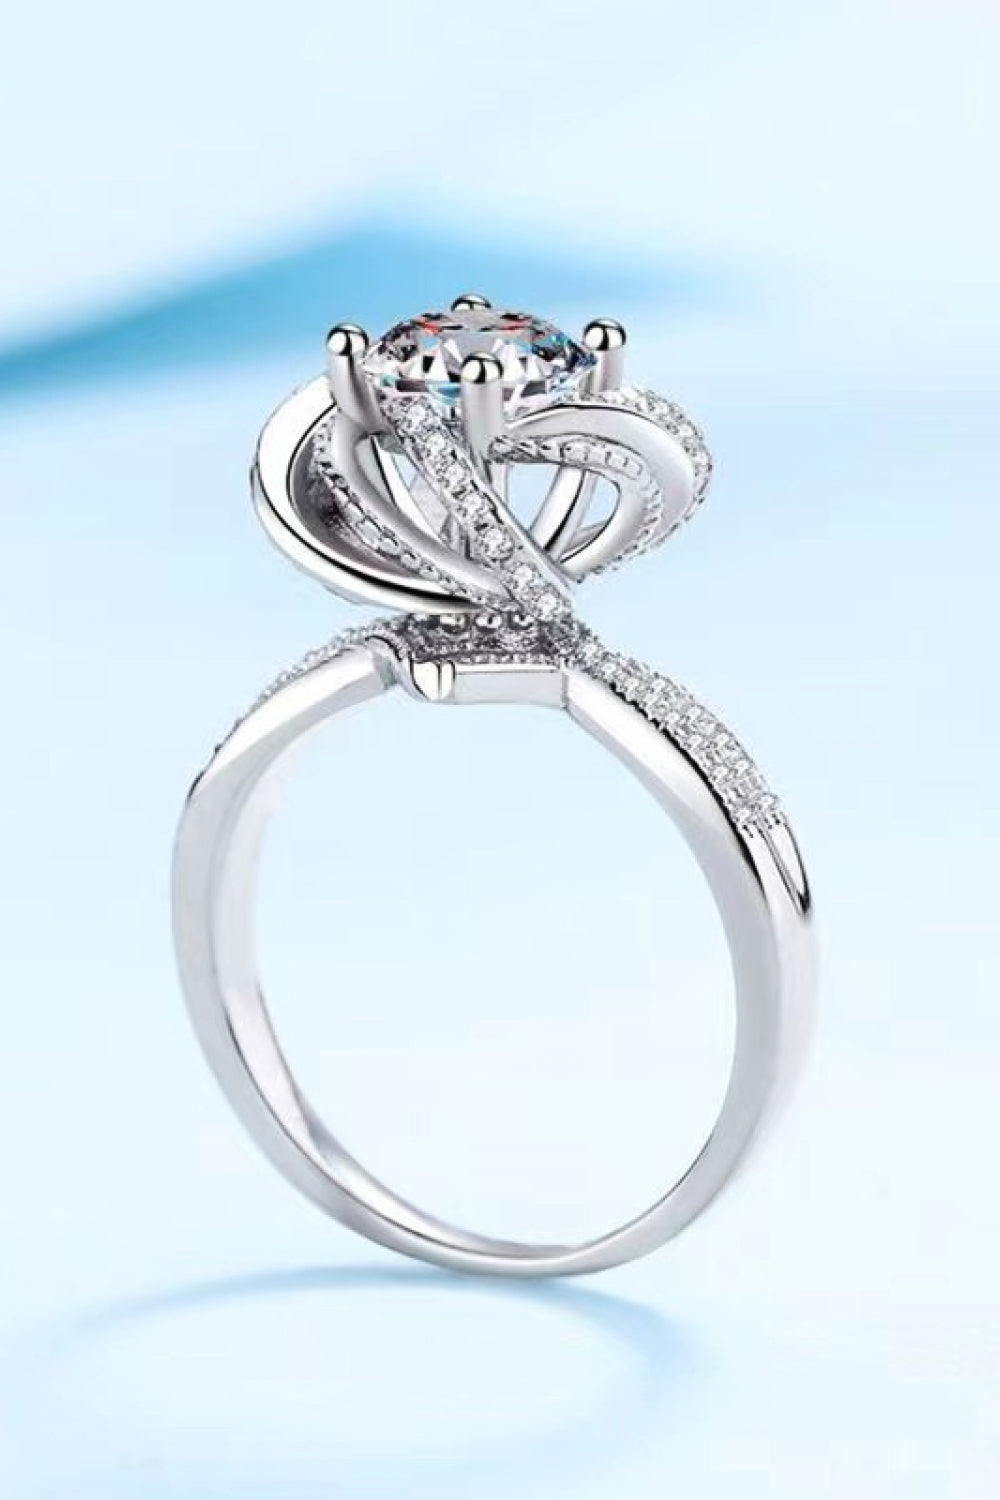 2 Carat Moissanite Floral Platinum-Plated Ring COCO CRESS